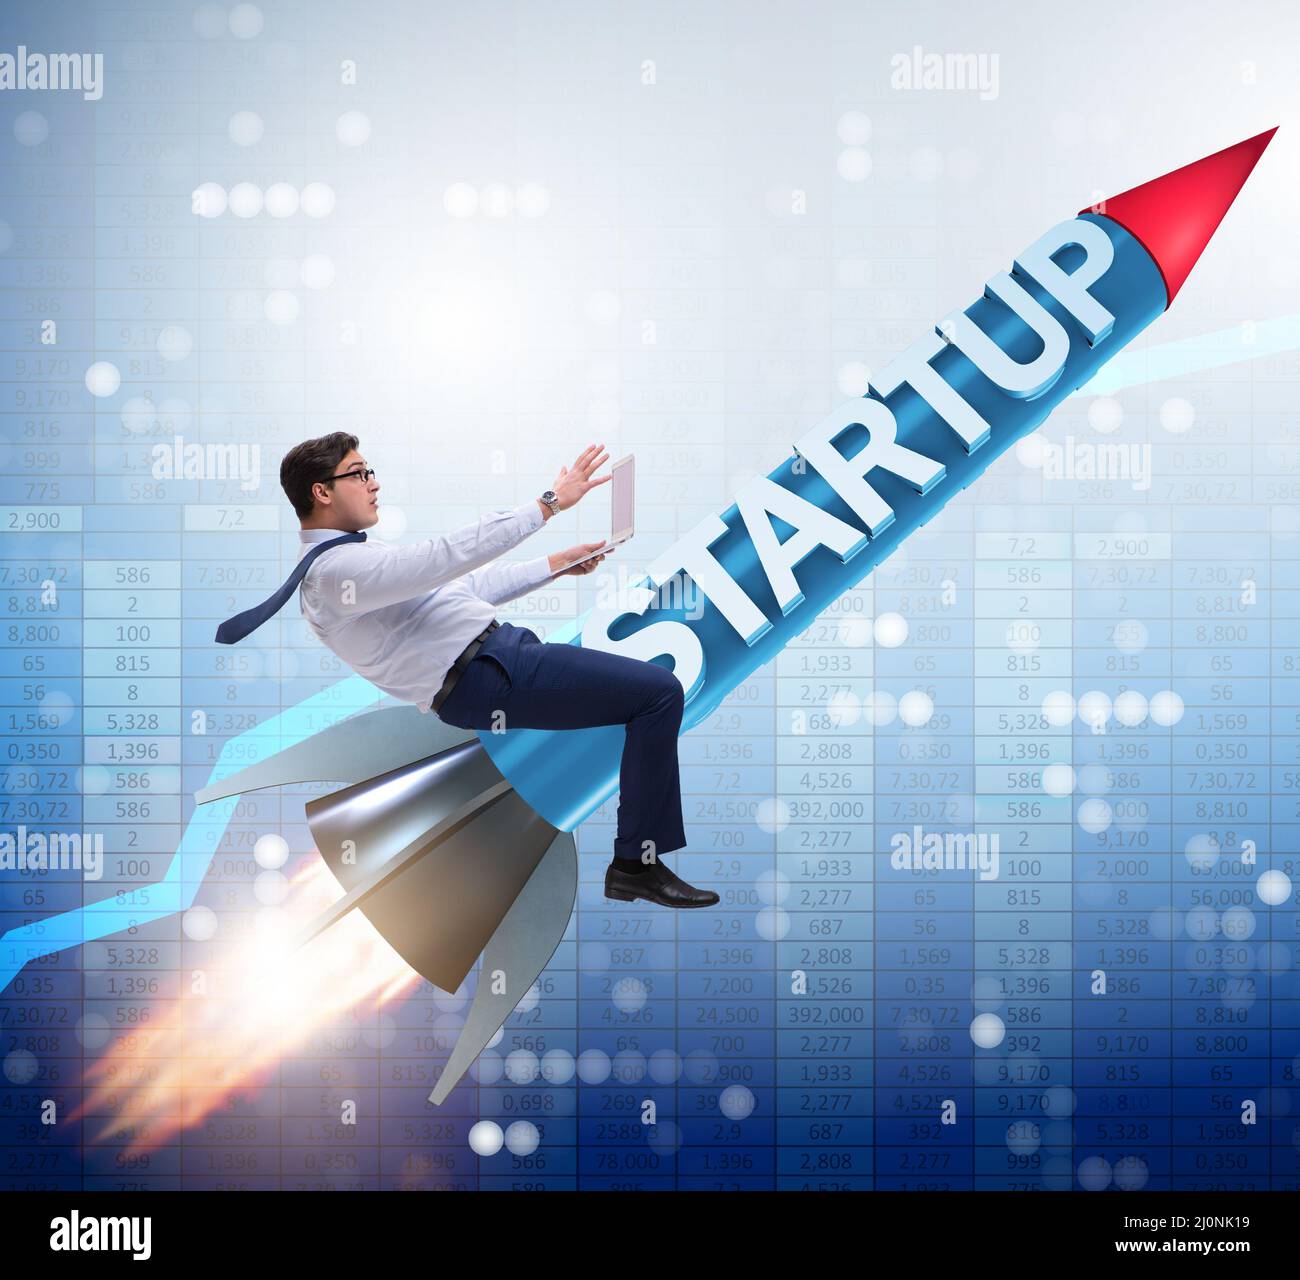 Businessman in start-up concept flying on rocket Stock Photo